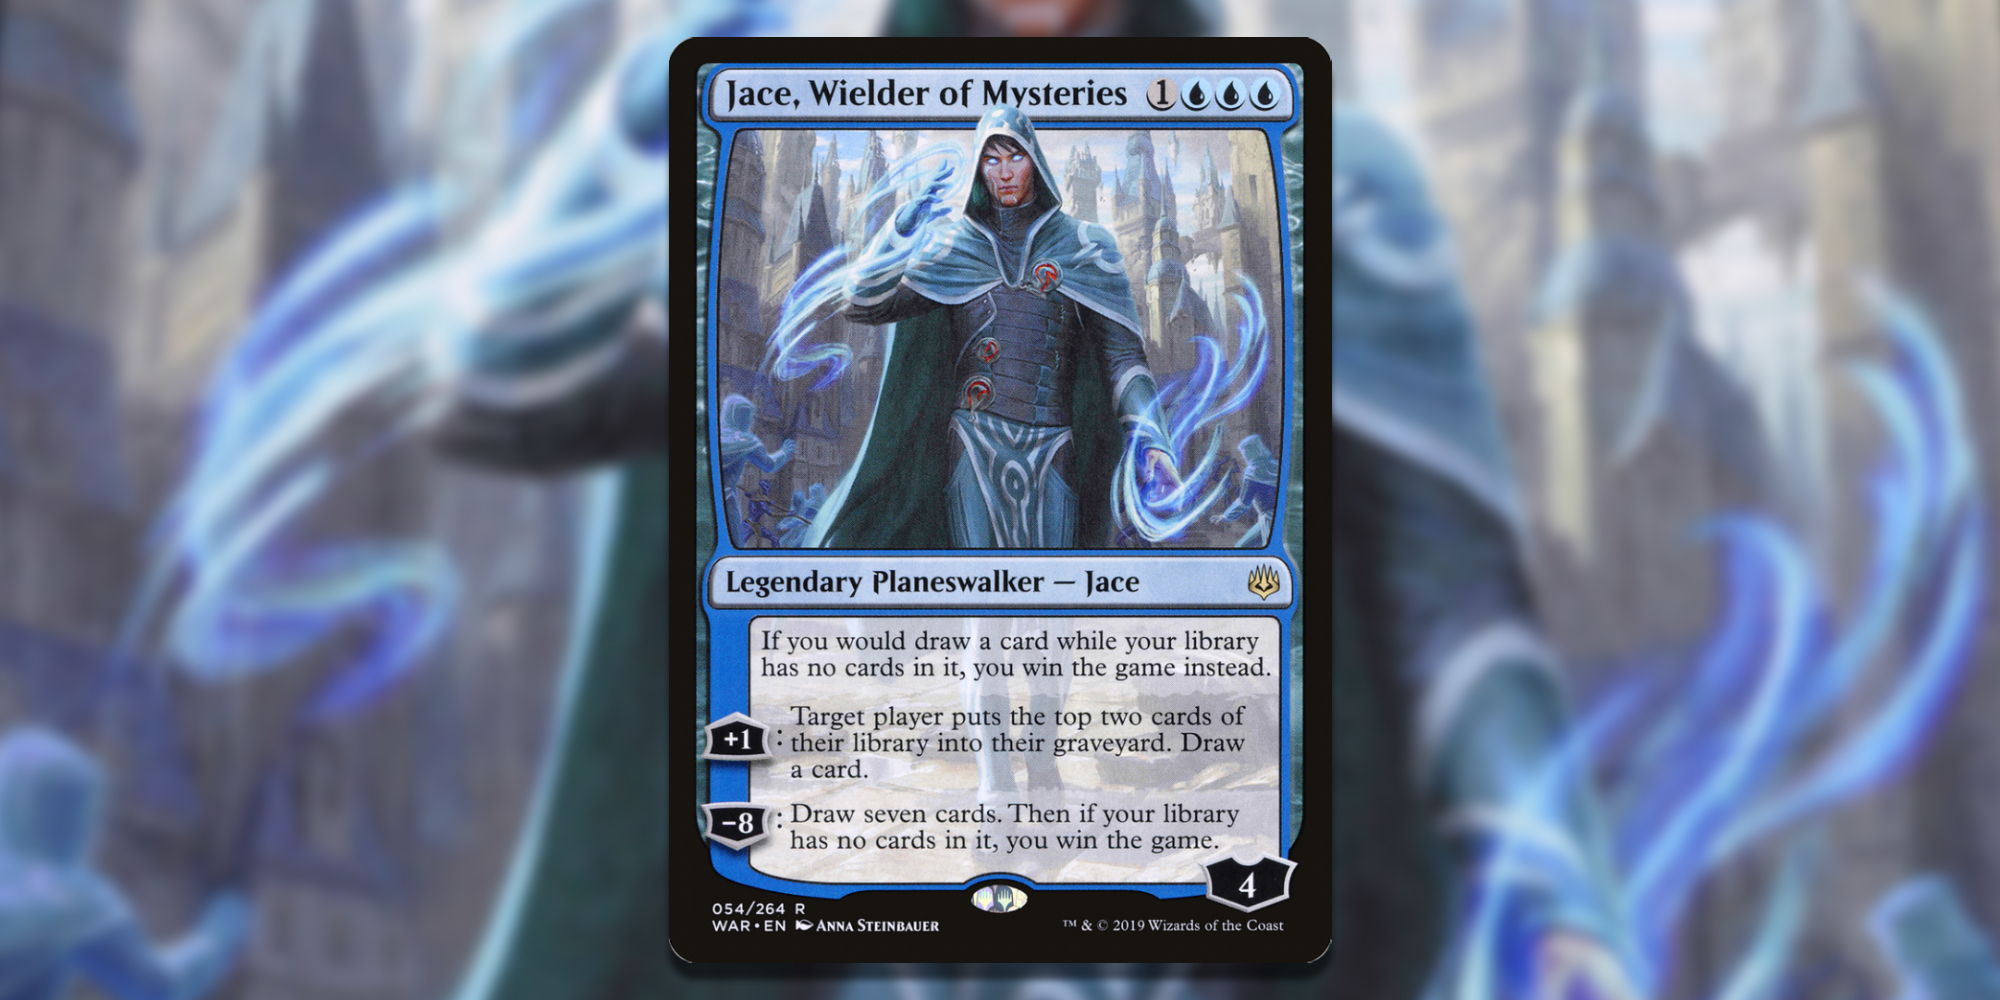 Card of Jace Wielder of Mysteries over Art Background